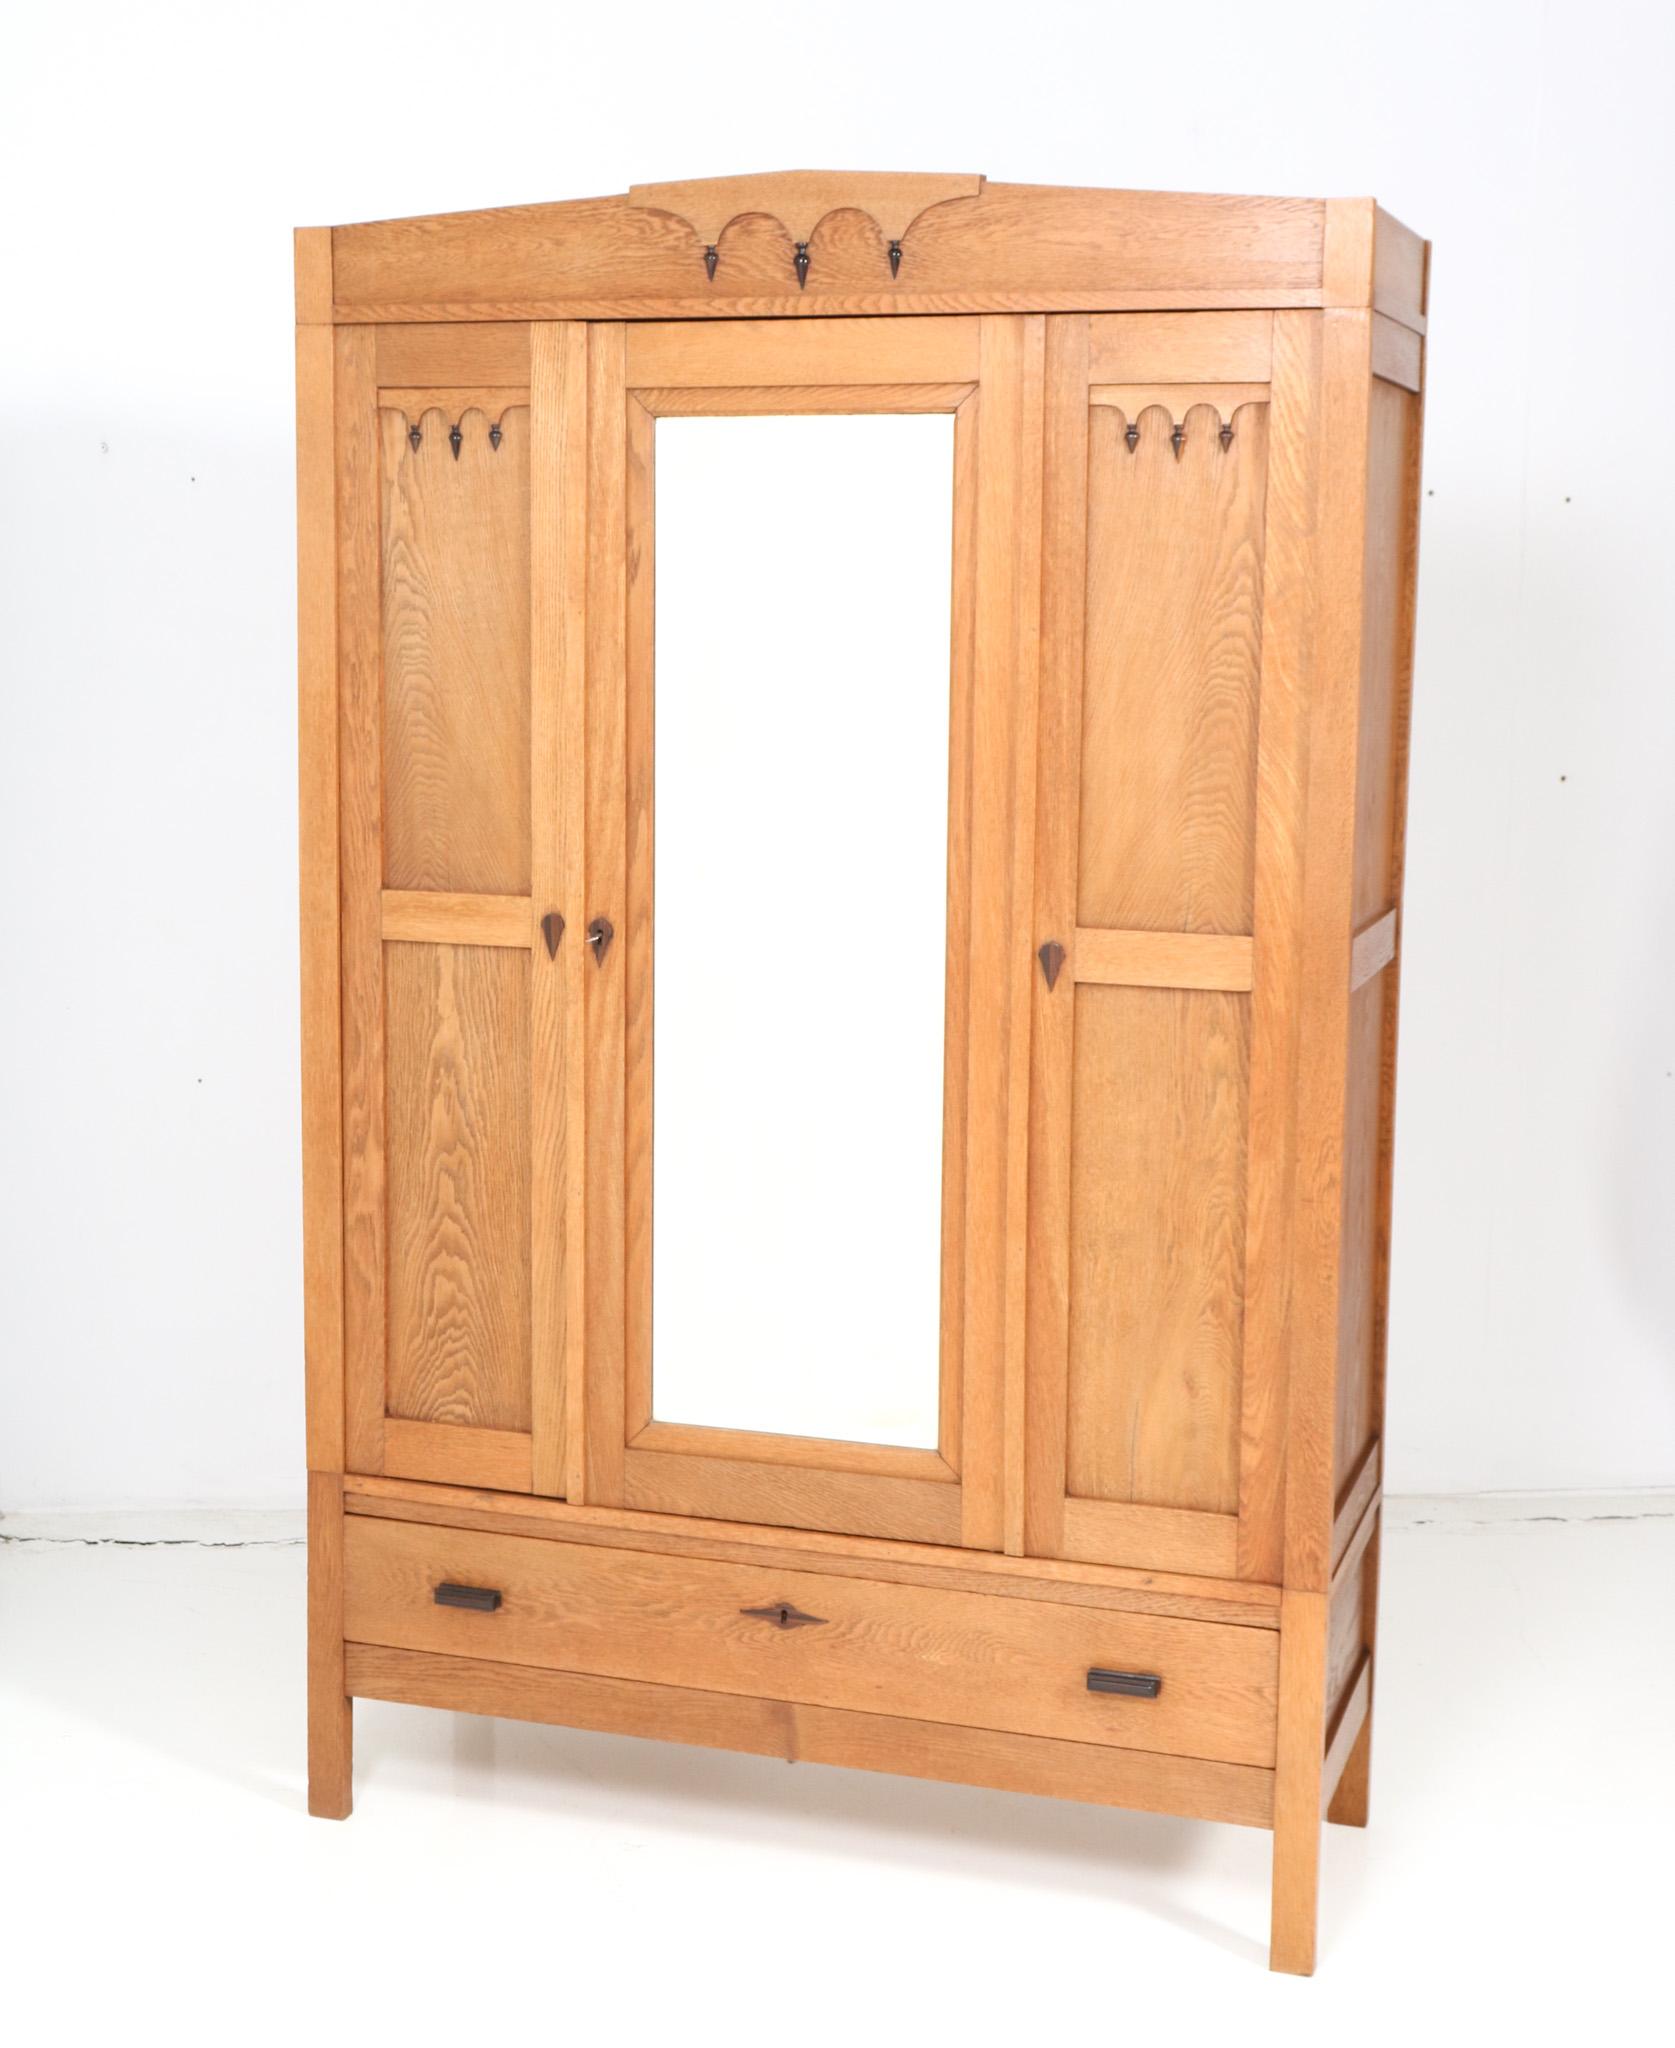 Stunning and rare Art Deco Amsterdamse School armoire or wardrobe.
Striking Dutch design from the 1920s.
Solid oak and original oak veneer and solid macassar ebony elements.
The drawer has solid macassar ebony handles.
In very good original